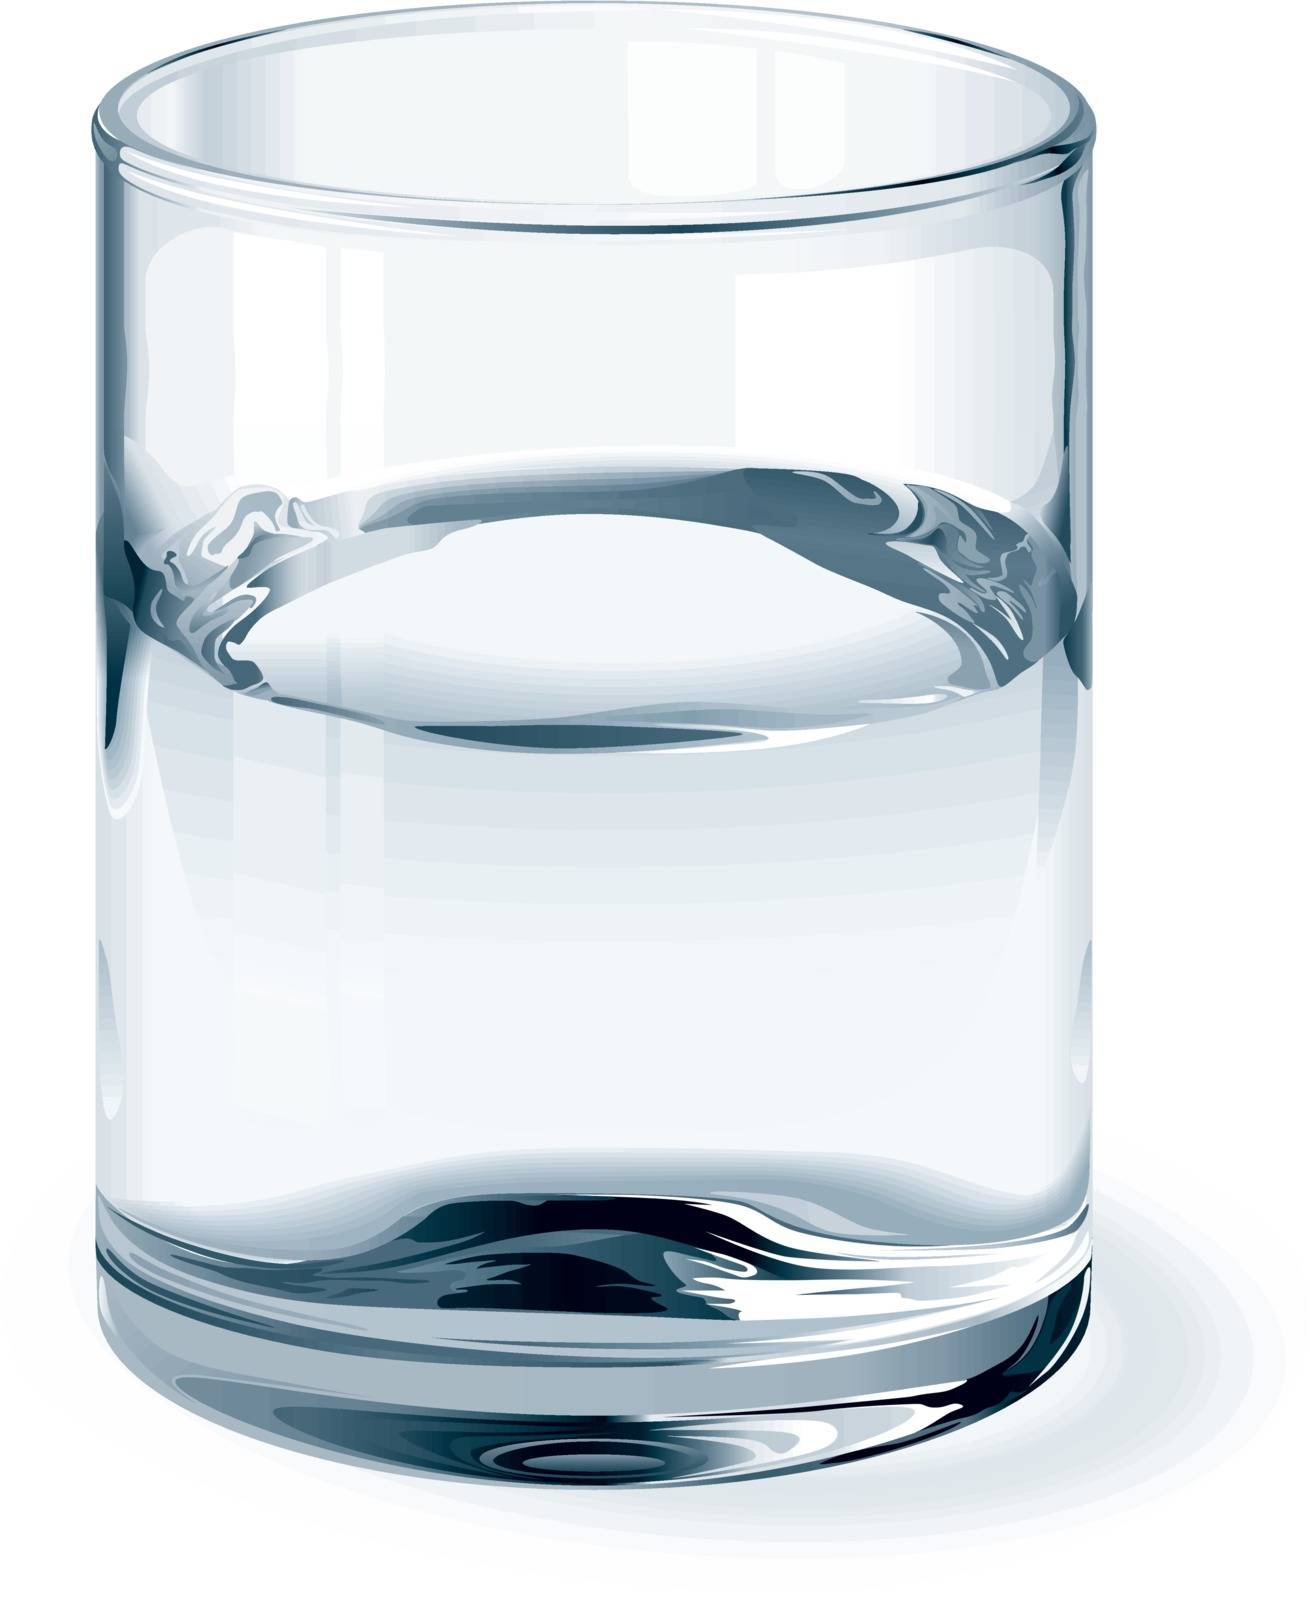 Glass of water isolated on white. One global color for glass and three colors for liquid. Gradients used. No mesh. Eps8. CMYK. Organized by layers. Easy change height of glass.